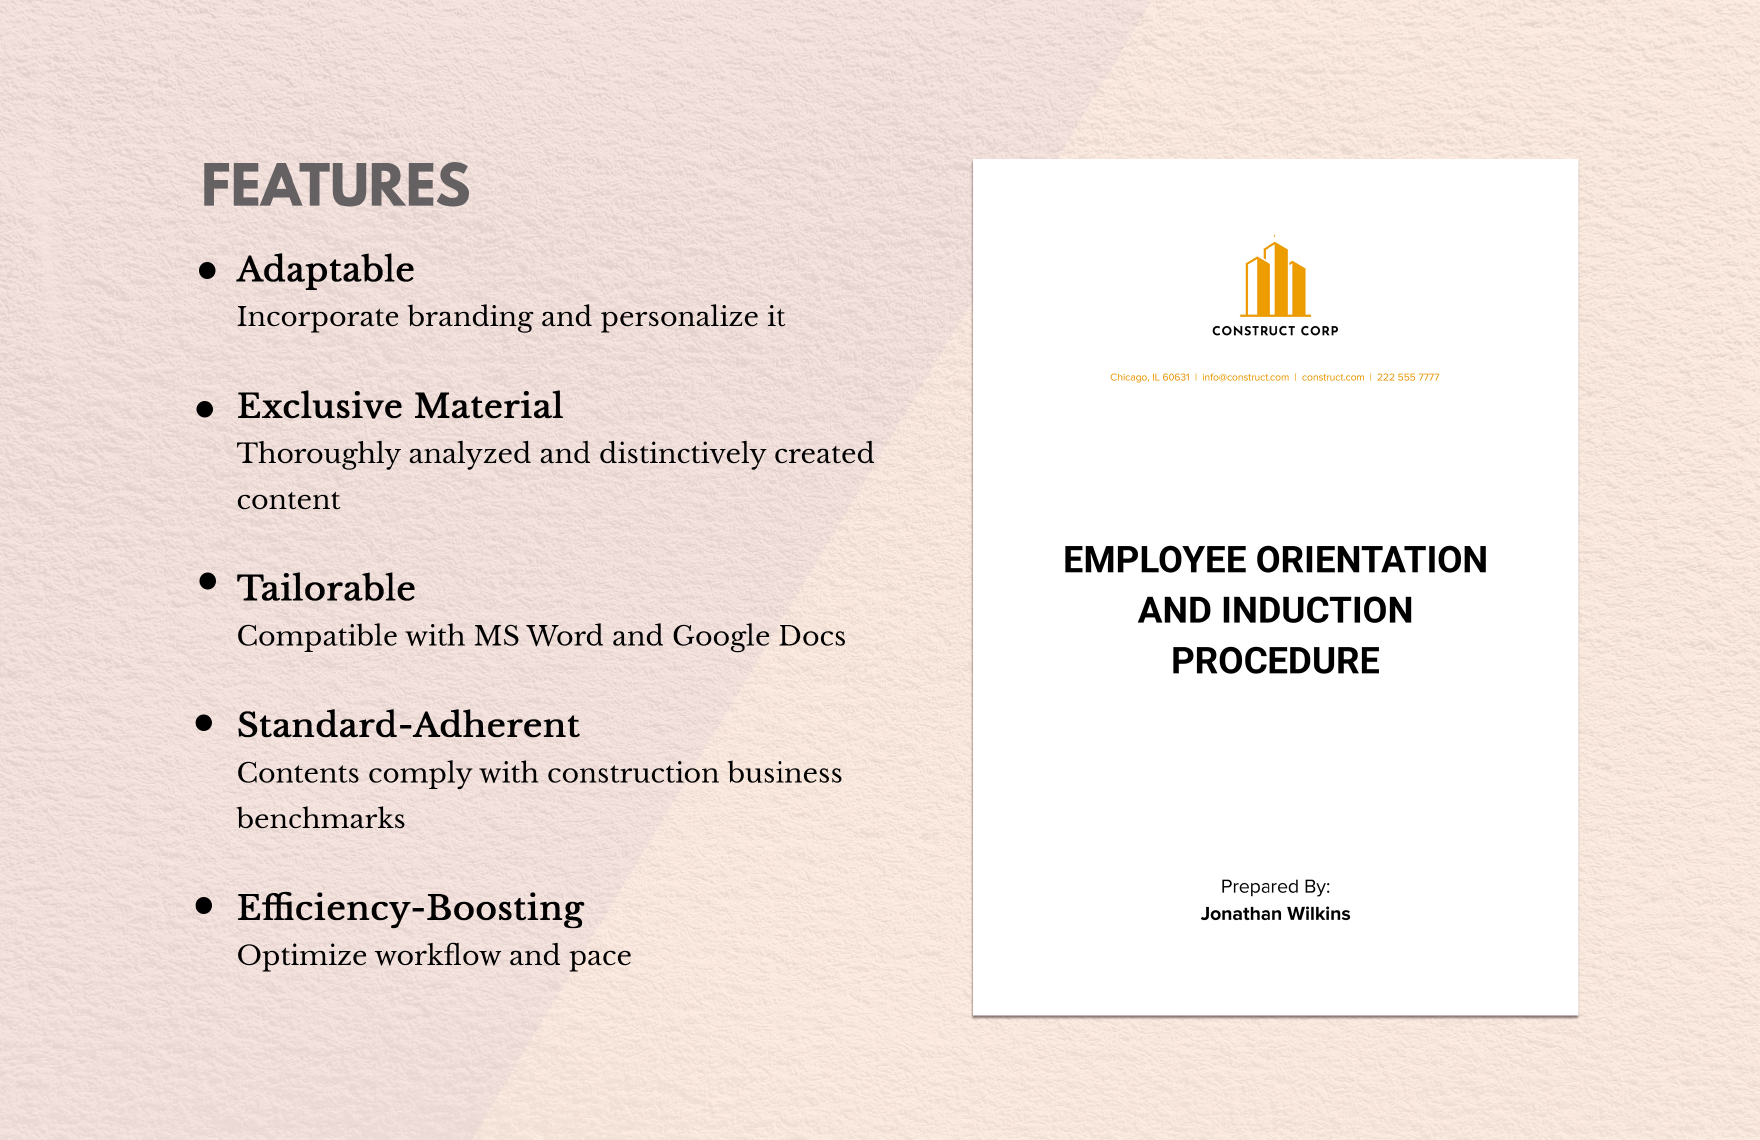 Employee Orientation and Induction Procedure